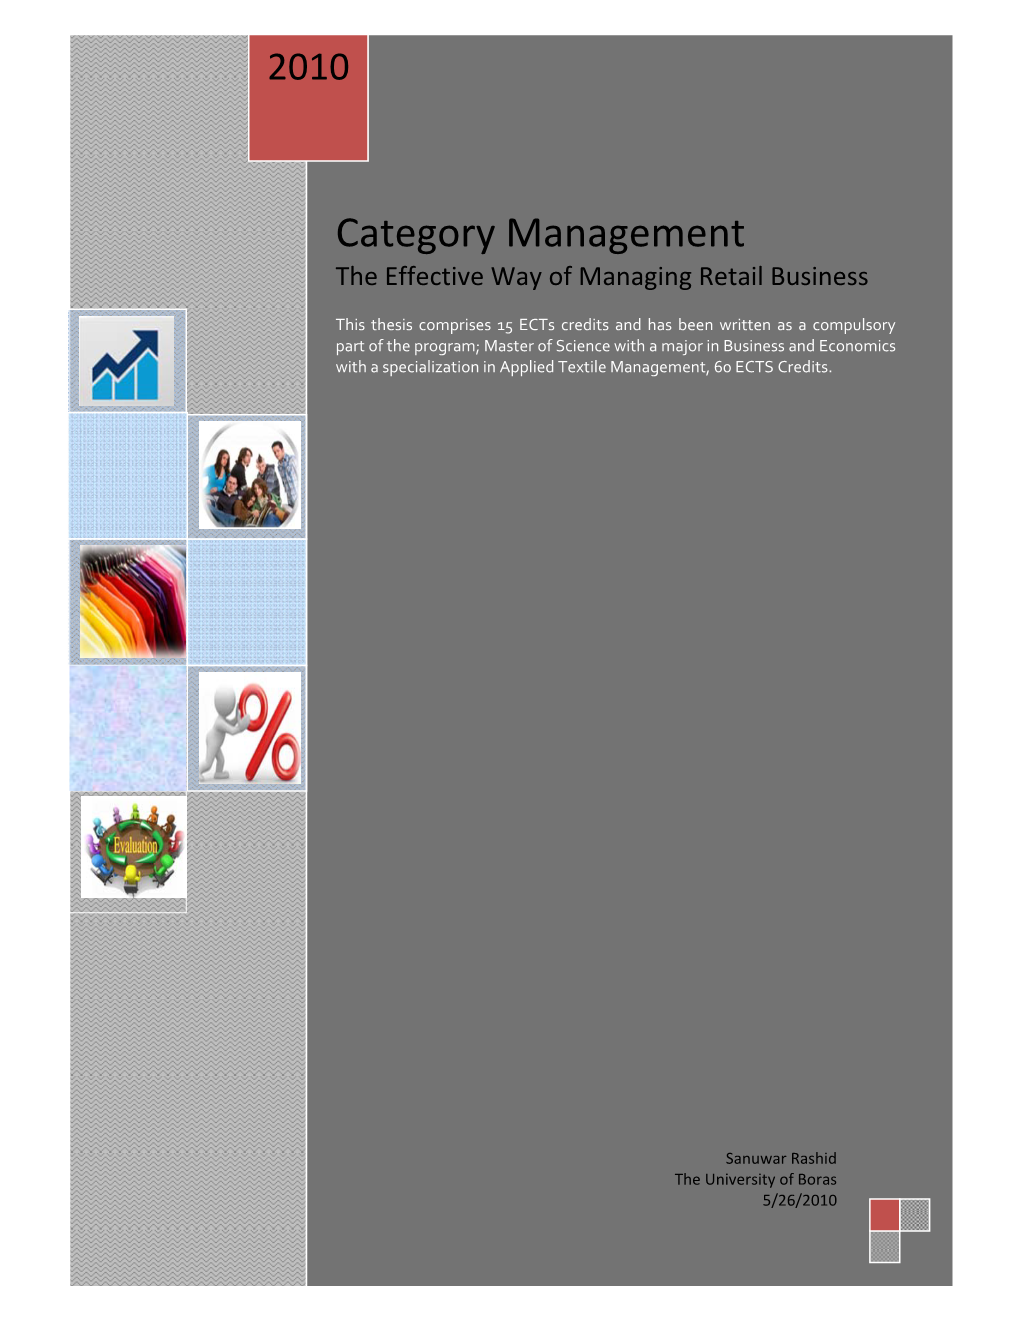 Category Management the Effective Way of Managing Retail Business